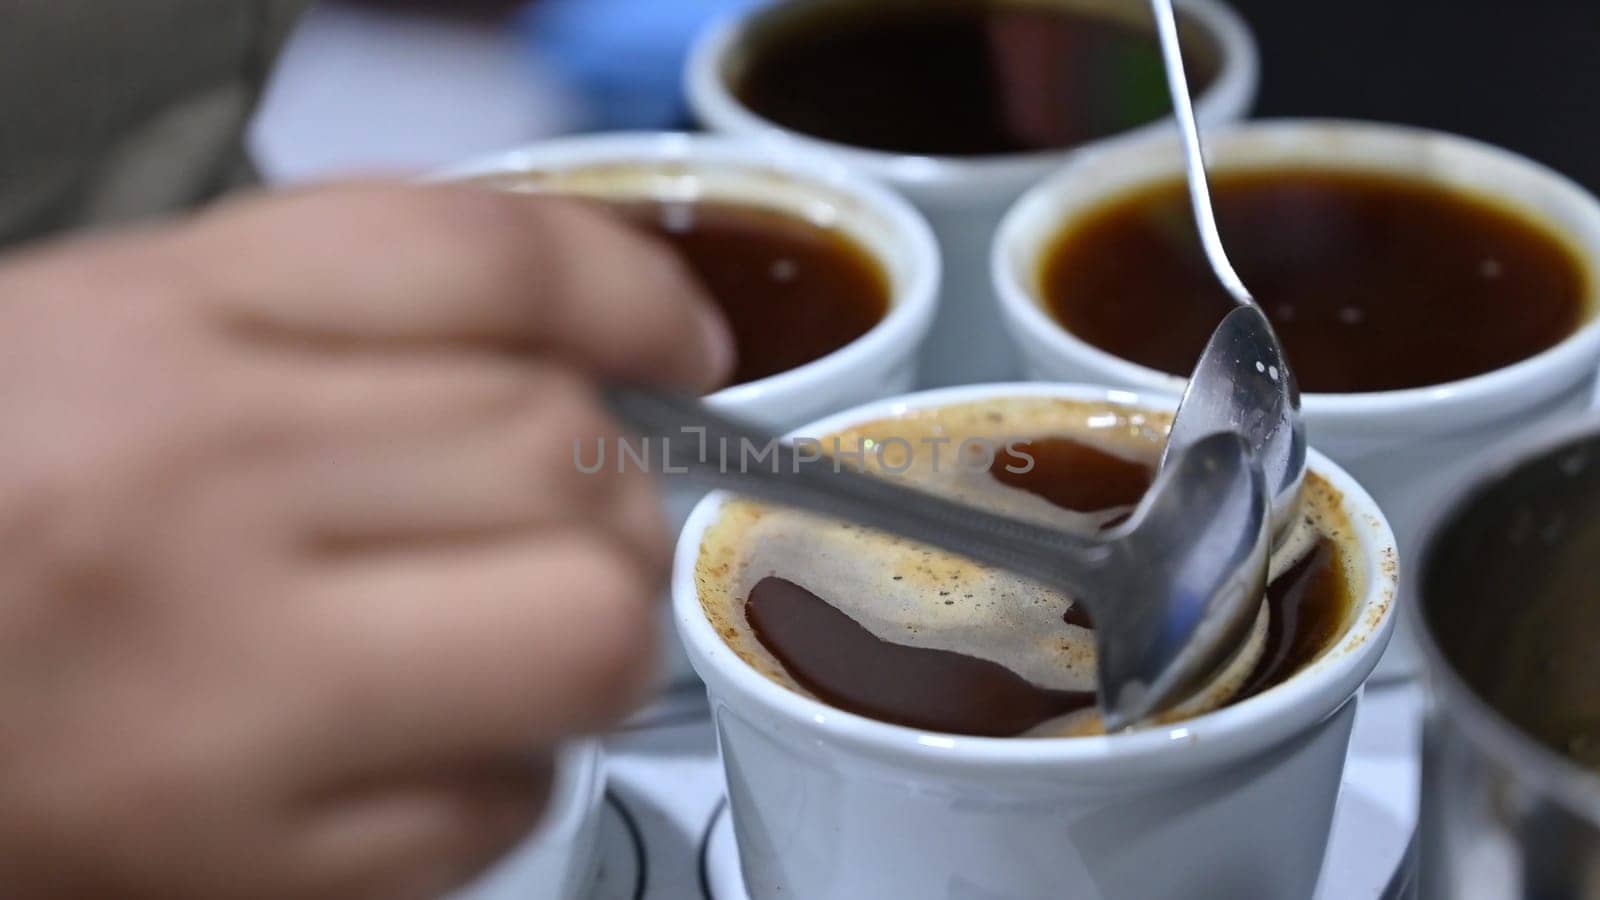 Professional barista tasting different types of coffee in cup tasters. Coffee degustation. by Peruphotoart